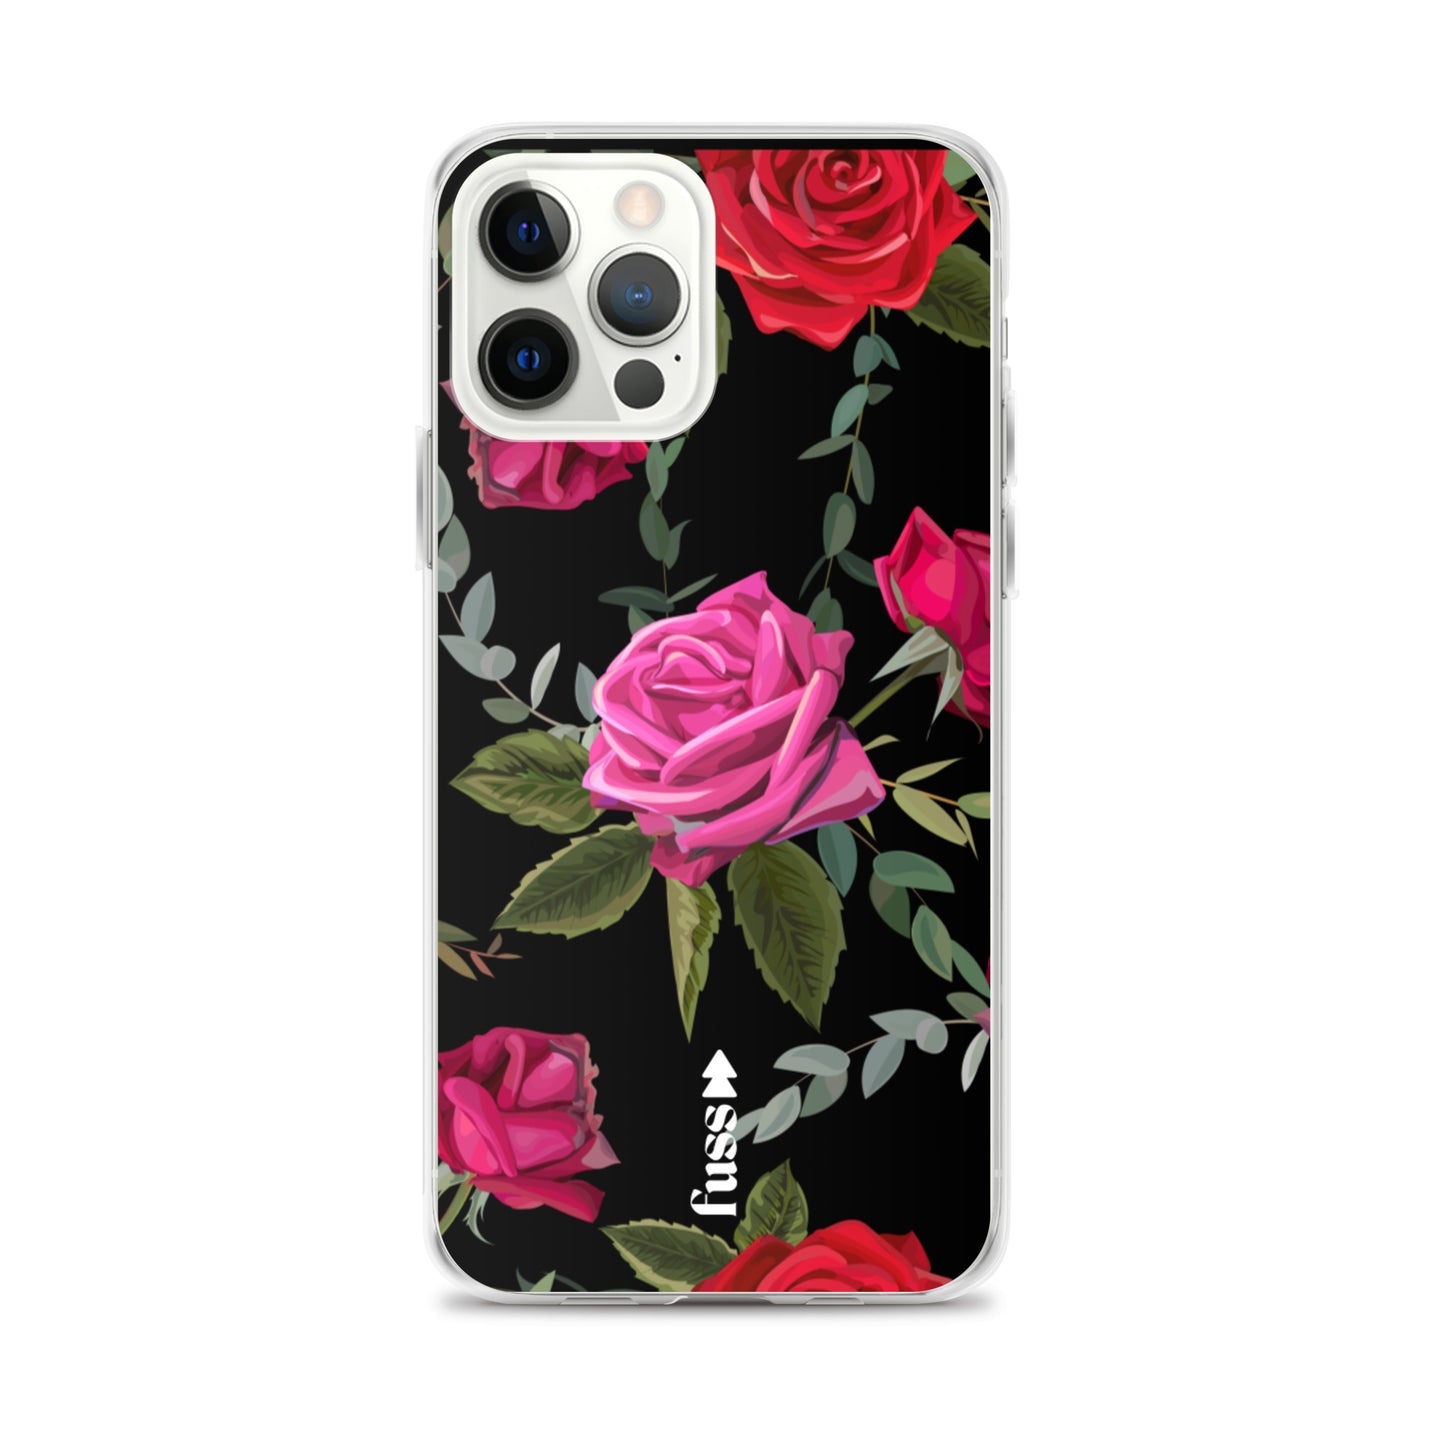 iPhone Case In Floral